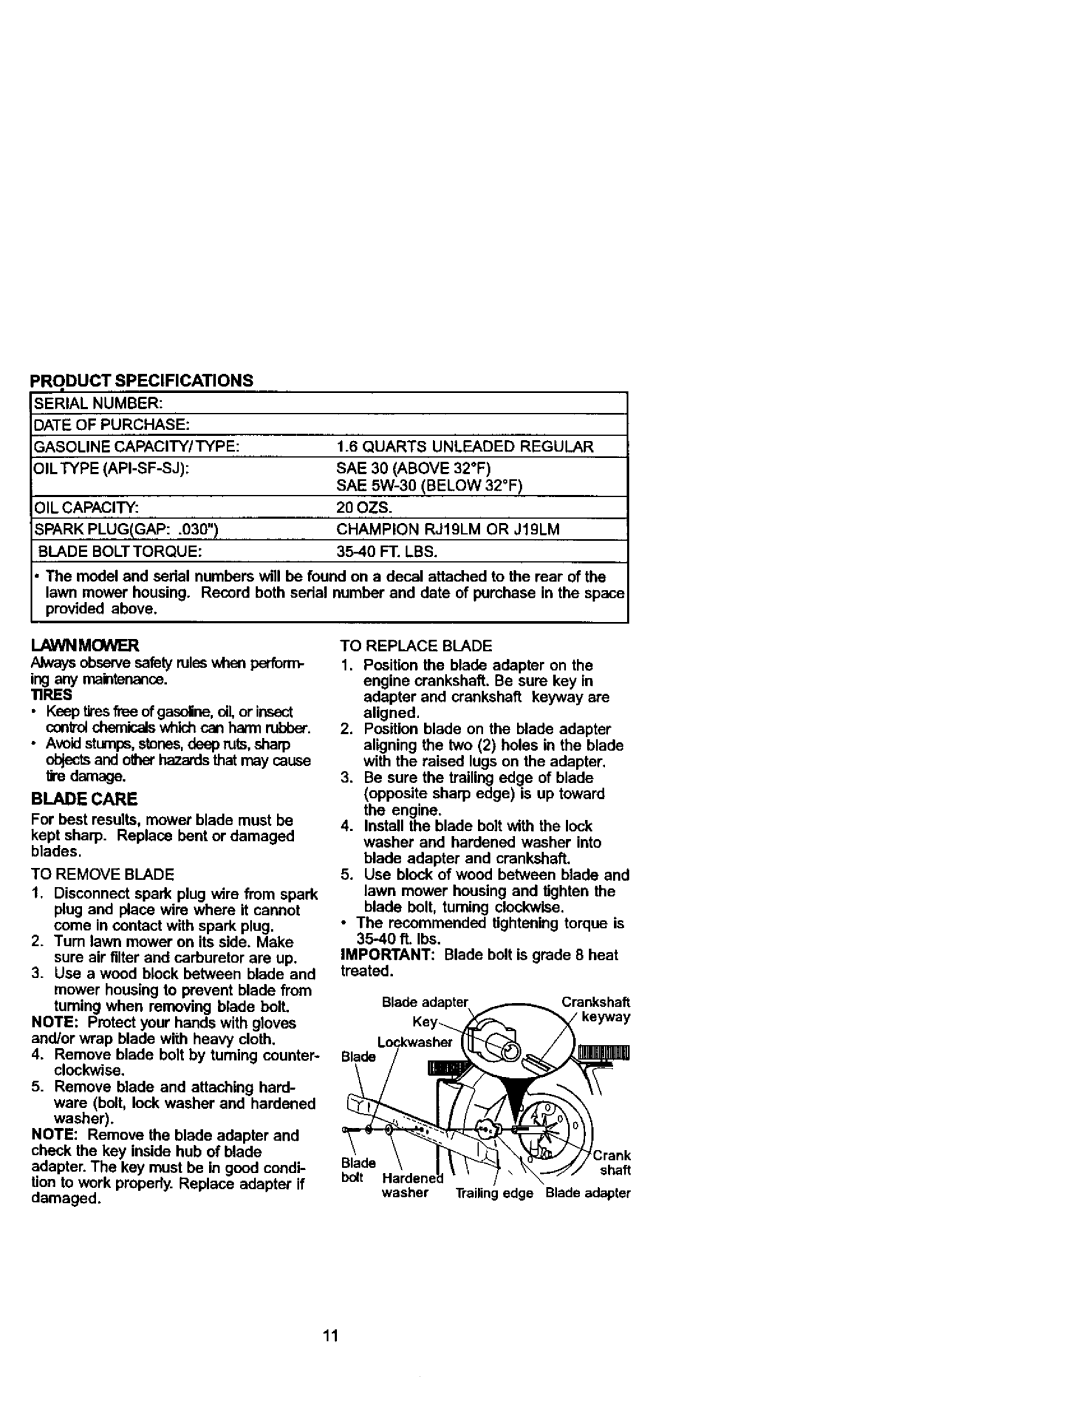 Craftsman 38872 owner manual Productspecifications Serialnumber Dateofpurchase, Gasolinecapacity/Type, 31LTYPEAPI-SF-SJ 